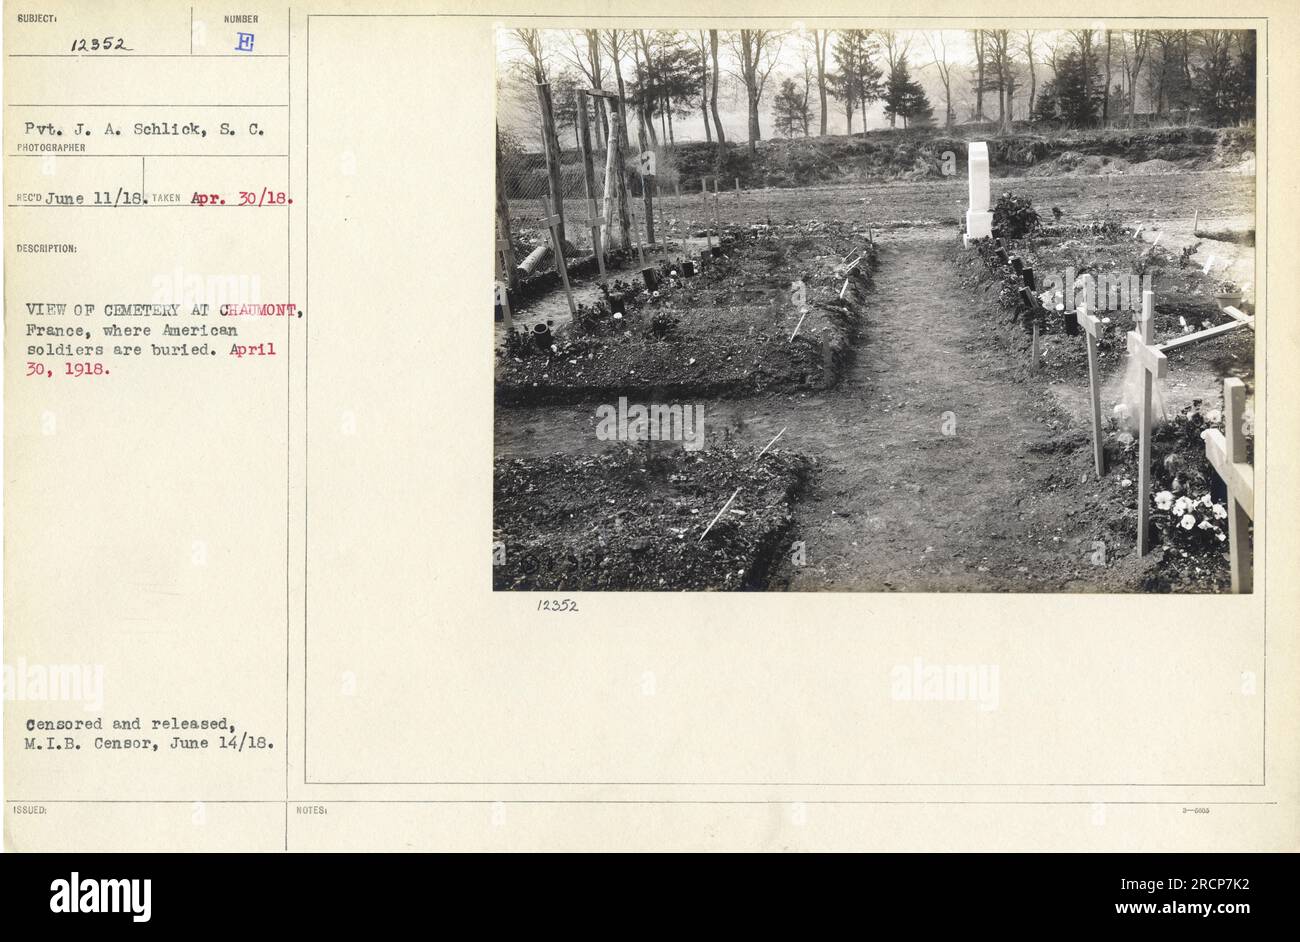 Private J.A. Schlick of the Signal Corps took this photograph on April 30, 1918. The image shows a cemetery in Chaumont, France, where fallen American soldiers are buried. It was taken during World War I and censored before being released by the M.I.B. censor on June 14, 1918. Stock Photo